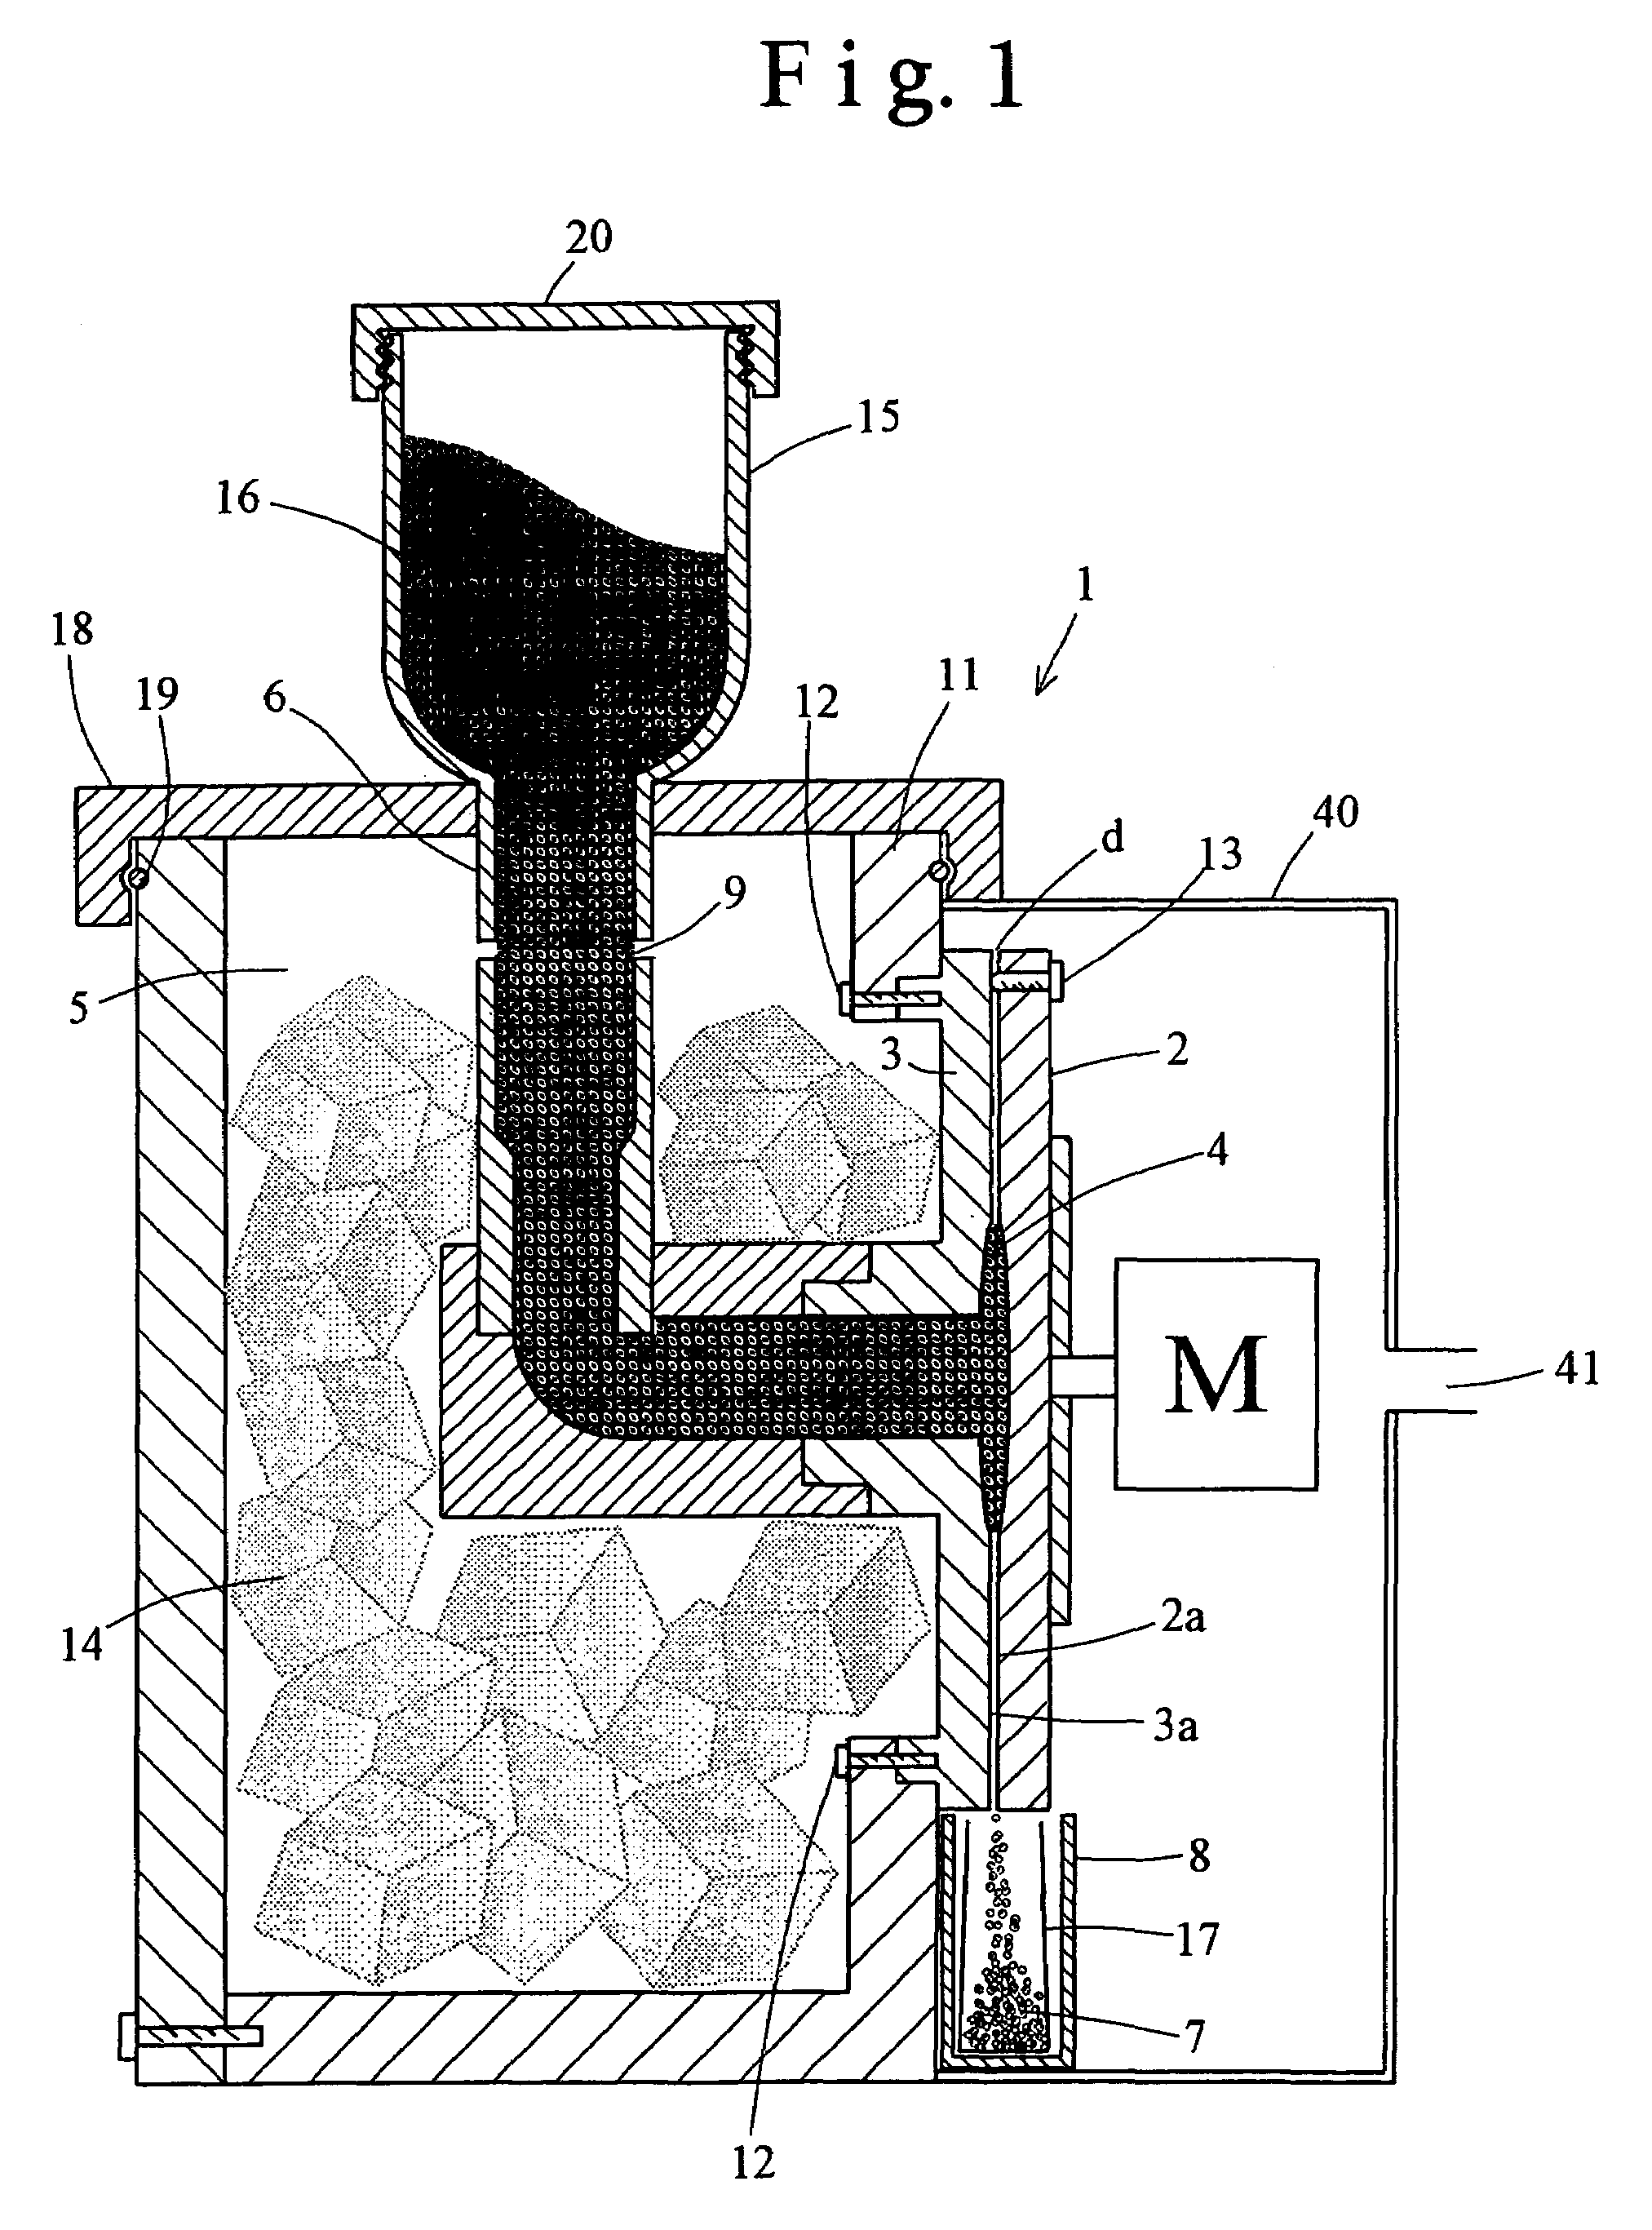 Process for producing crushed product, apparatus therefor and crushed product